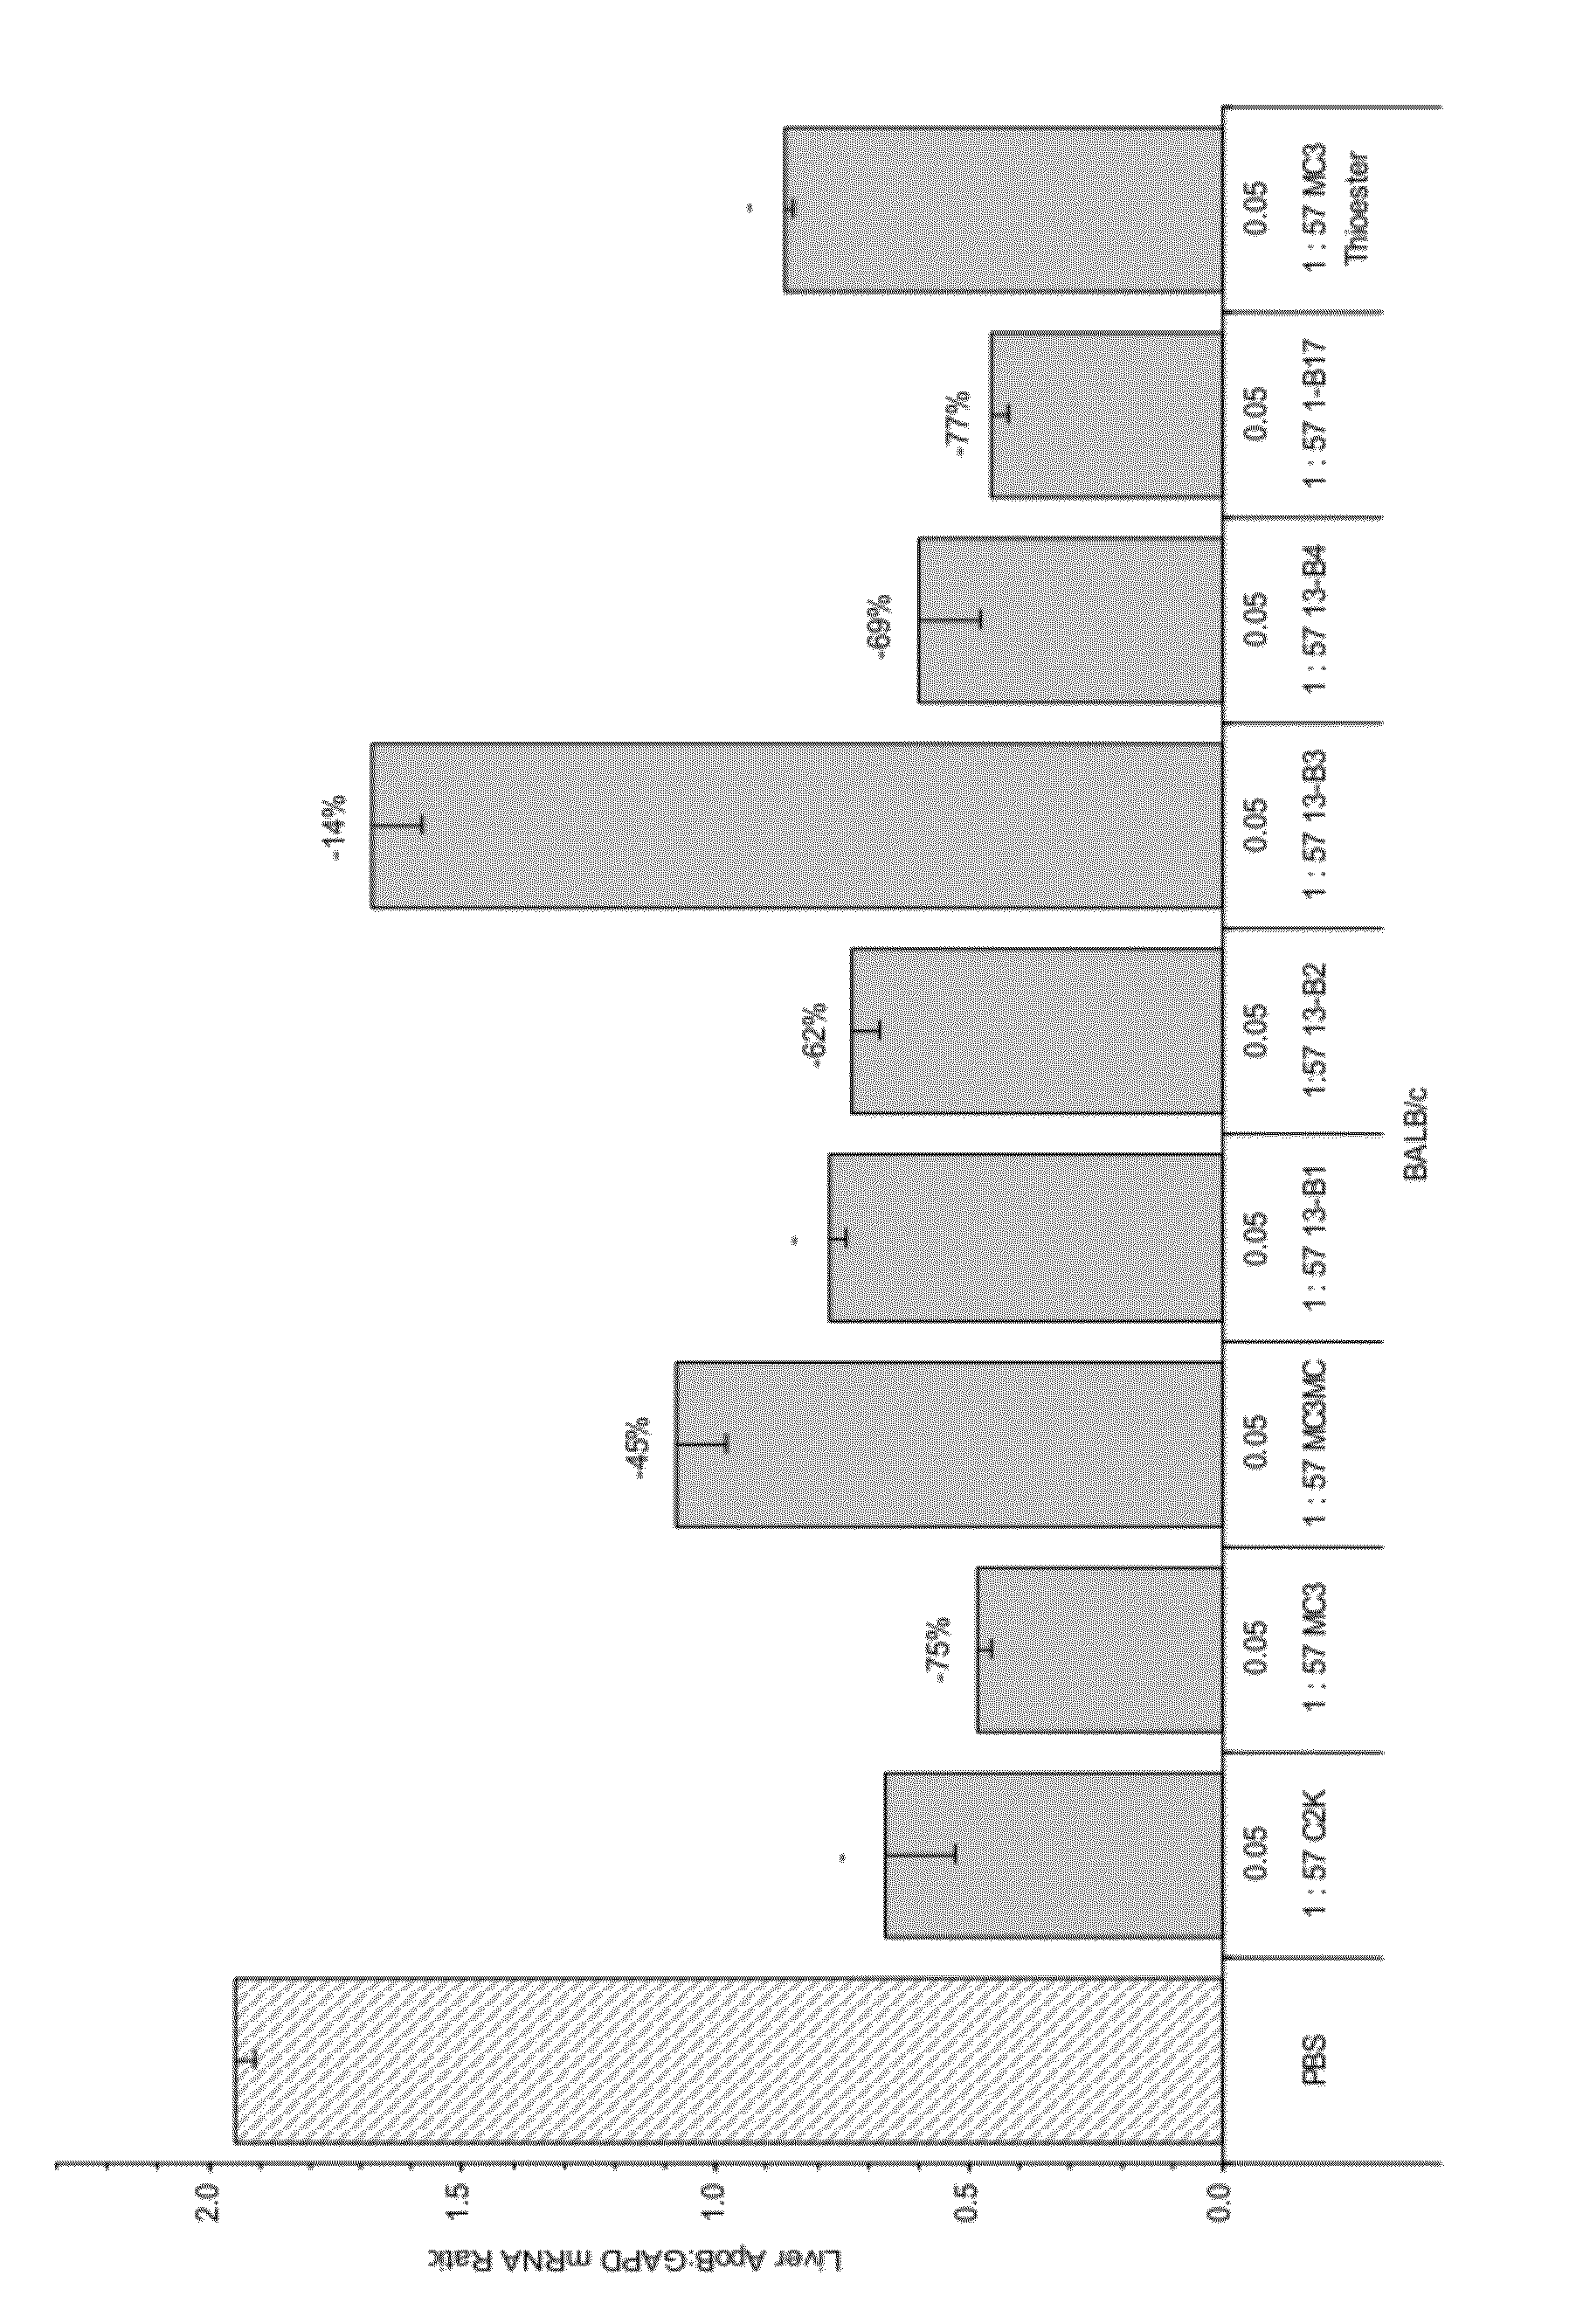 Novel trialkyl cationic lipids and methods of use thereof